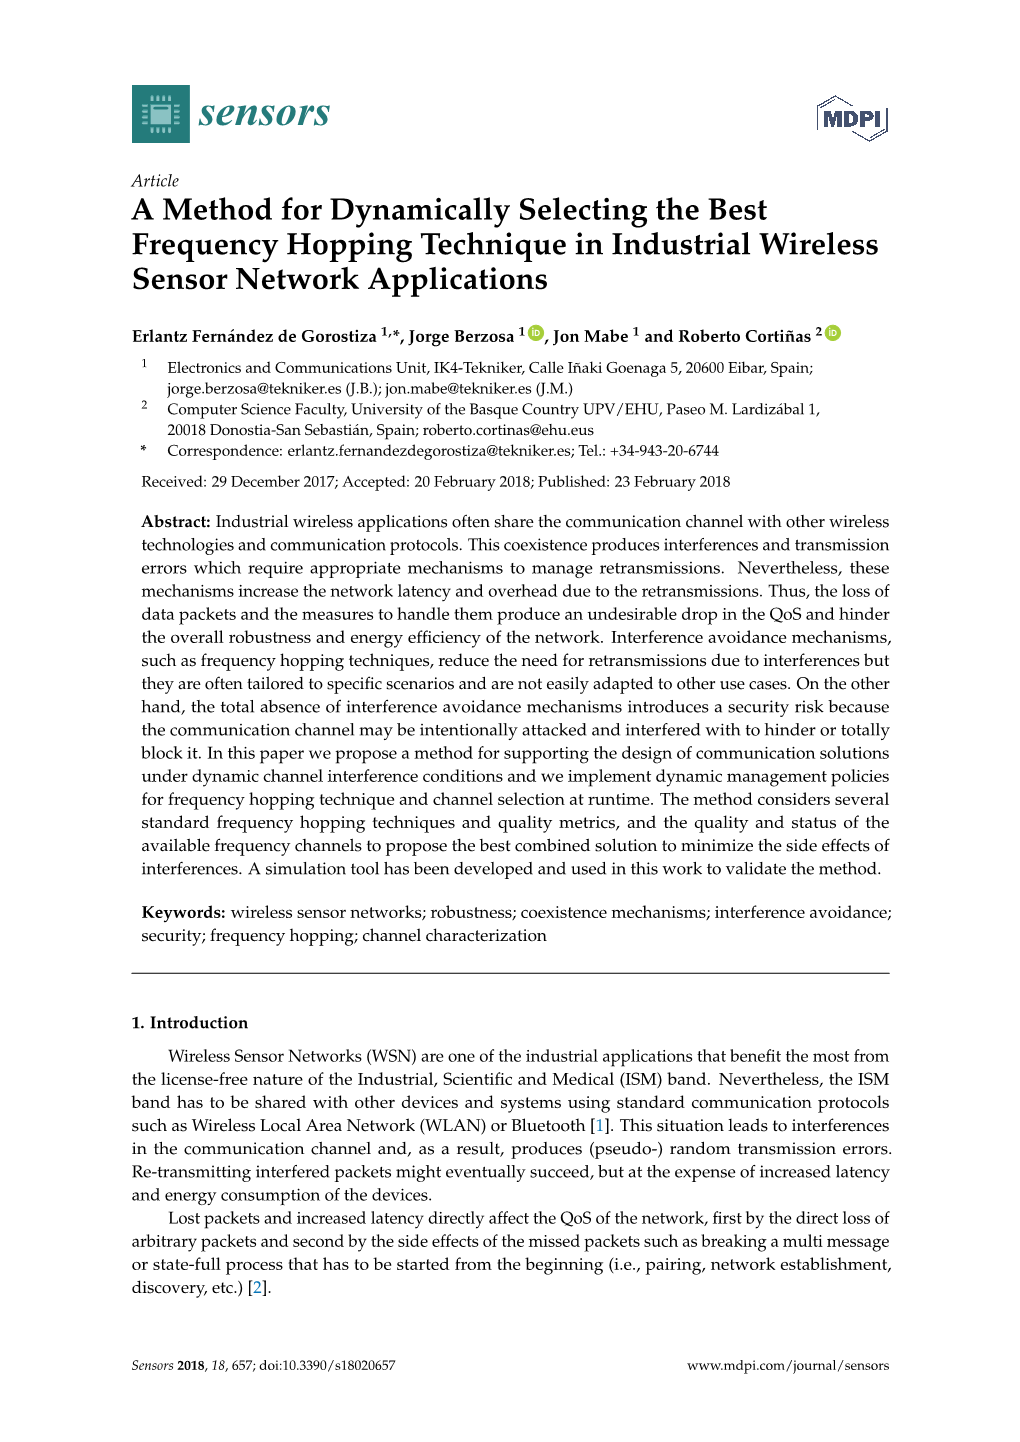 A Method for Dynamically Selecting the Best Frequency Hopping Technique in Industrial Wireless Sensor Network Applications